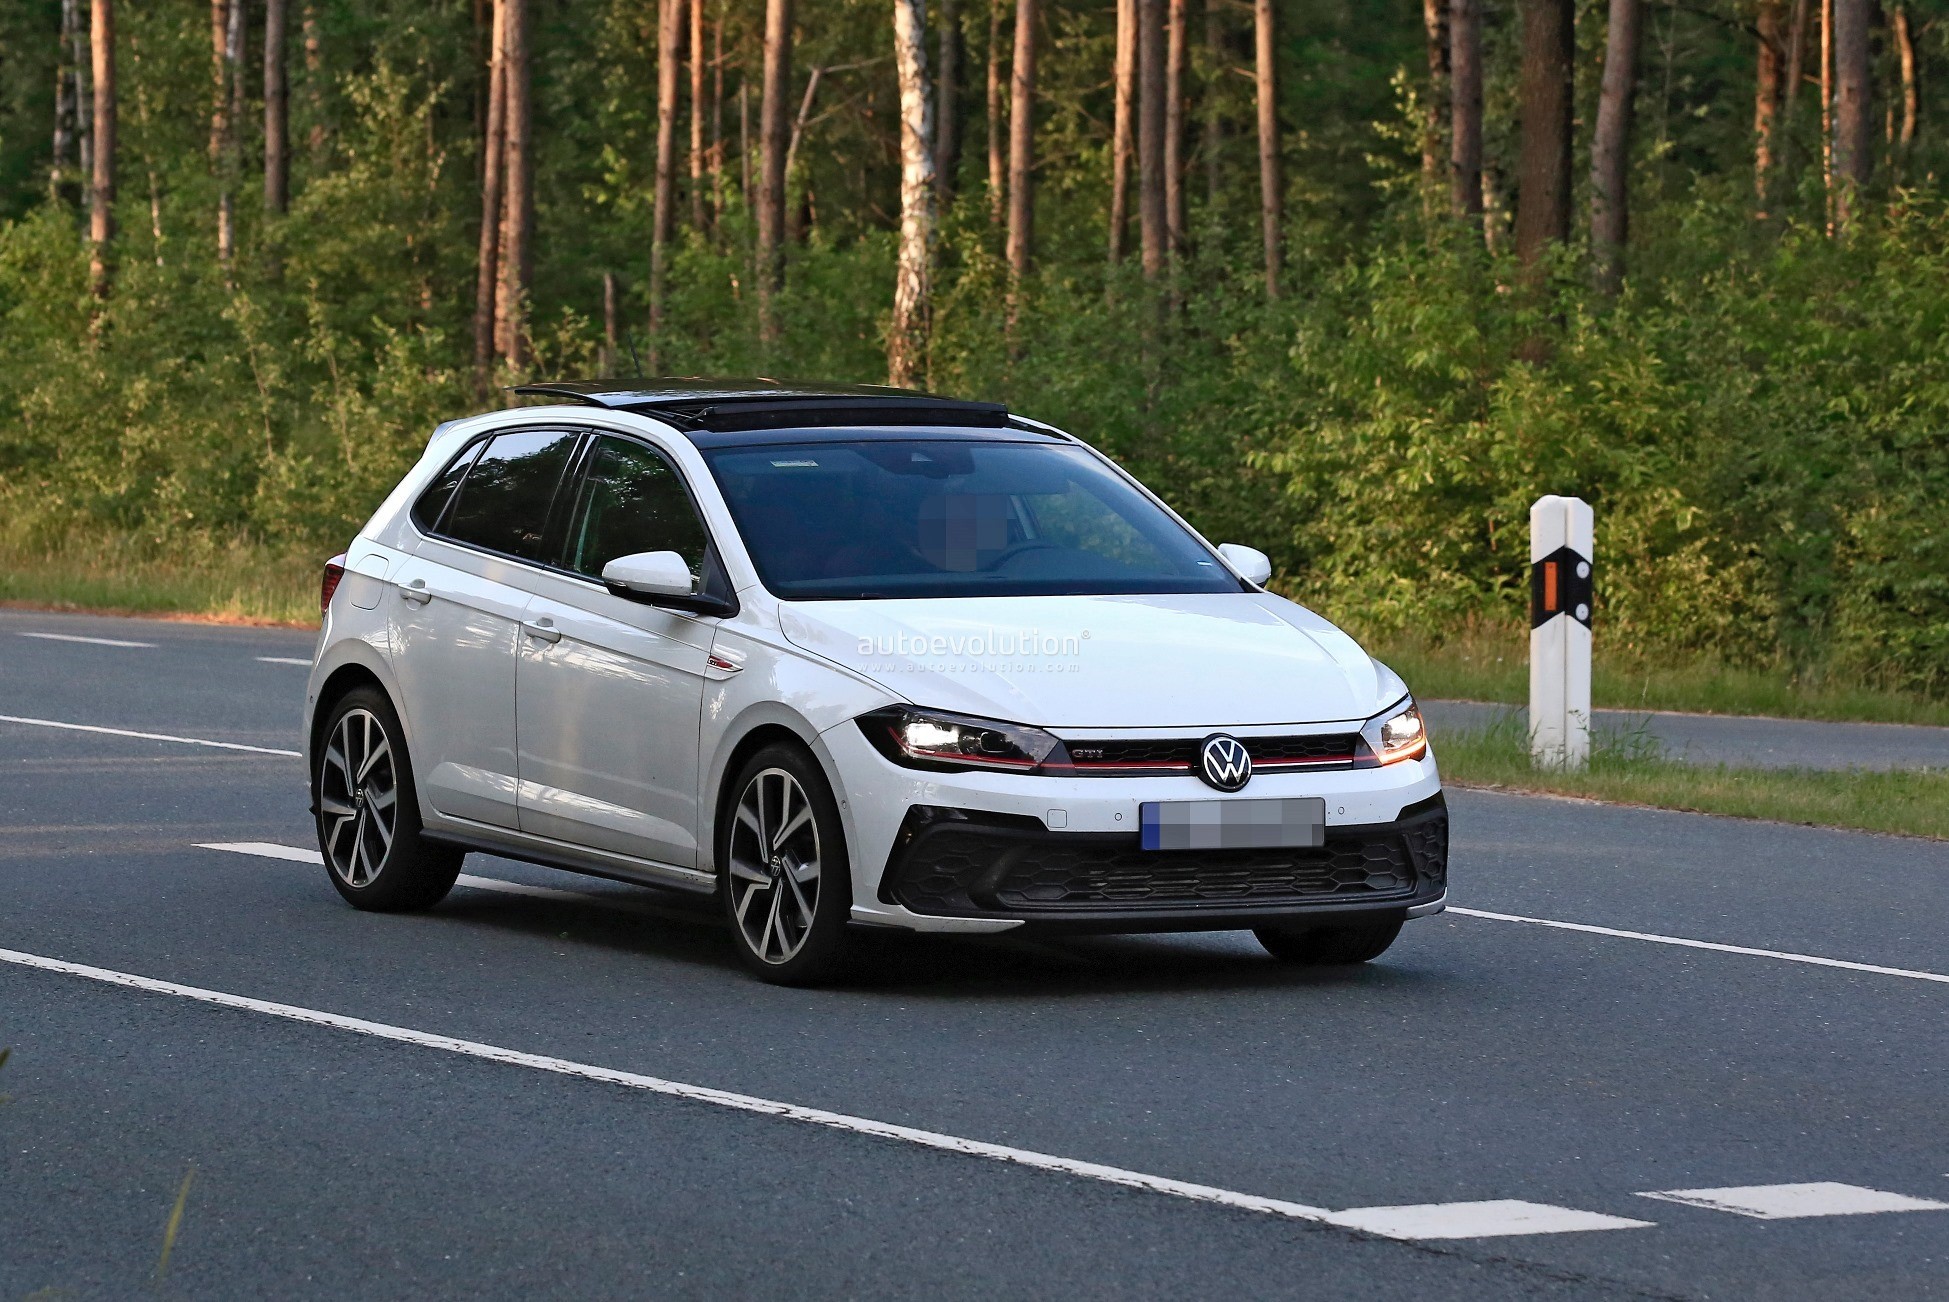 2021 VW Polo Facelift Speculatively Rendered Based On Spy Shots